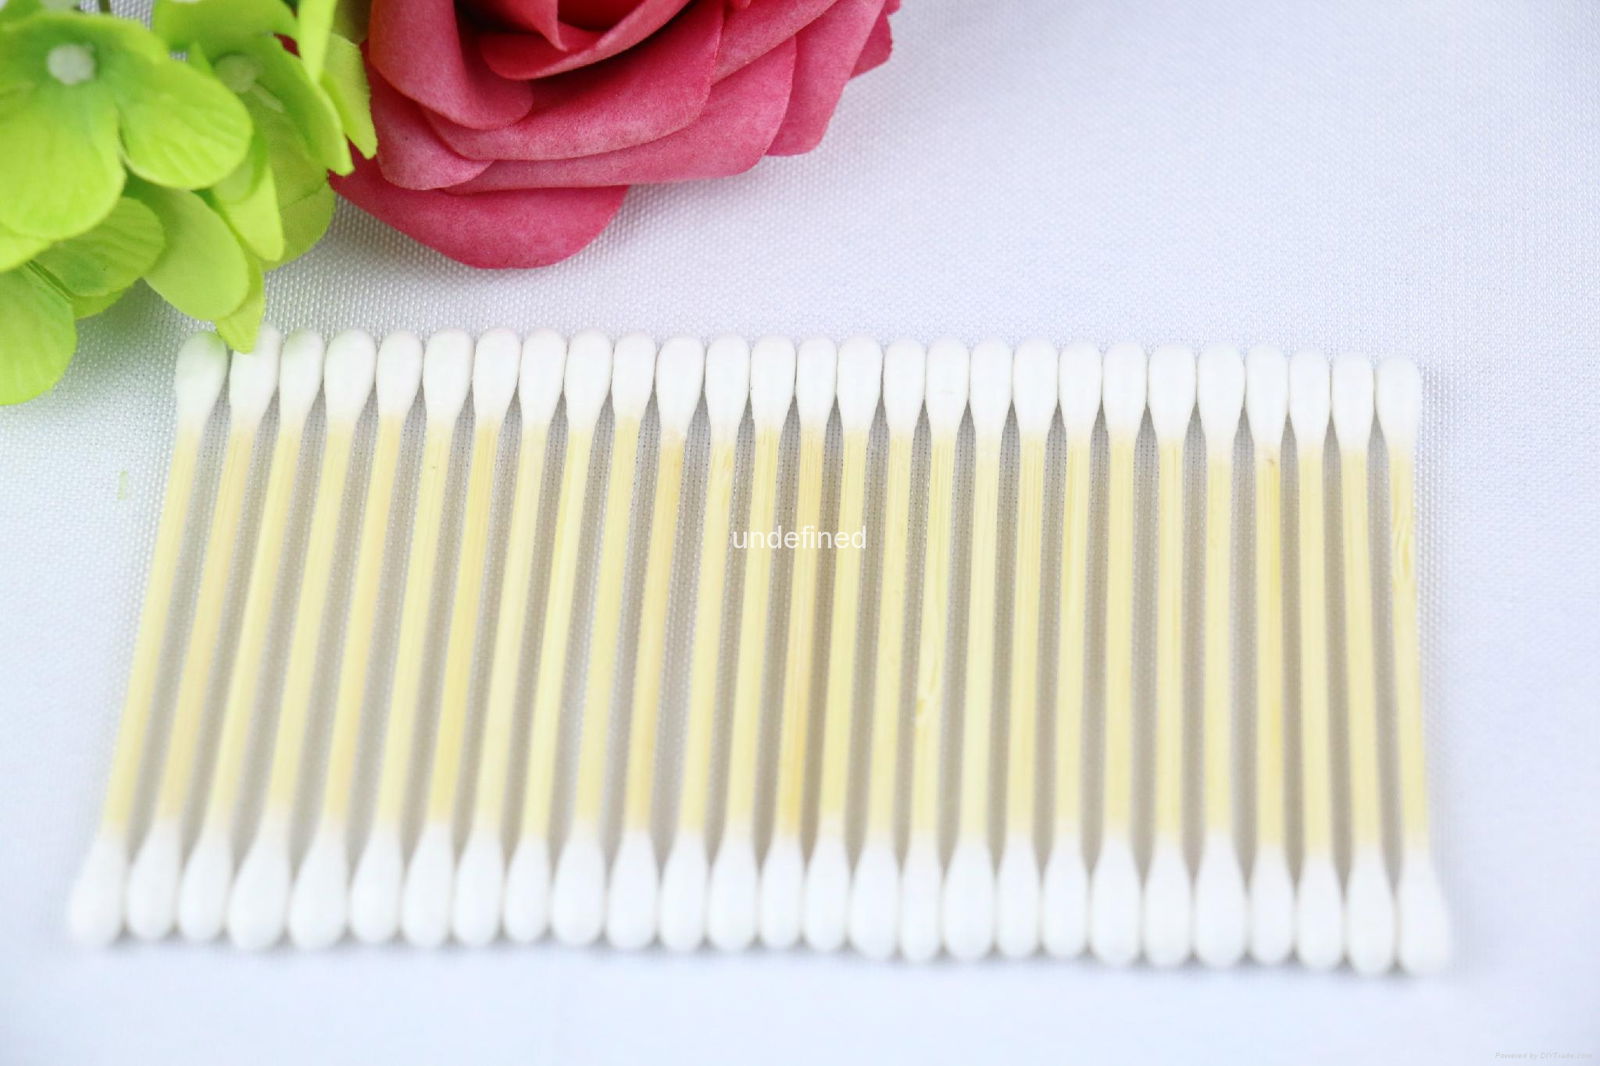 200p Plastic bamboo stick cotton buds ear clean for medical Q-tip cotton swabs m 3